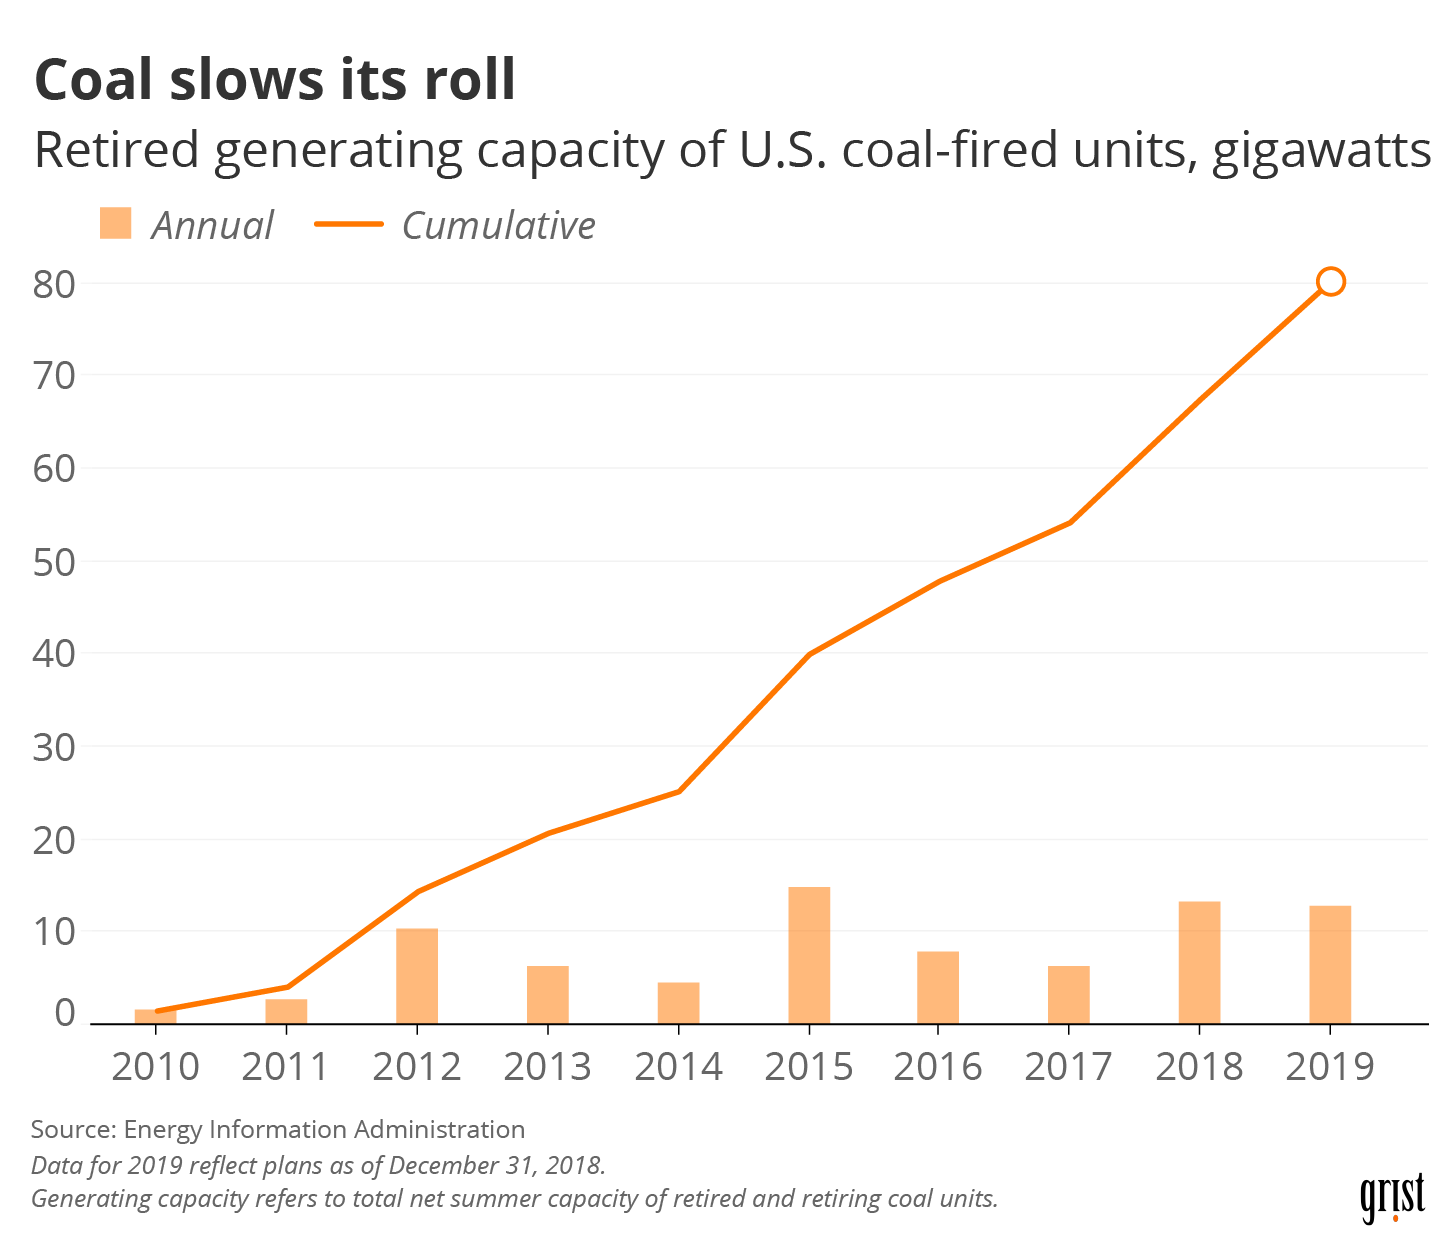 A line chart showing the retired generating capacity of U.S. coal-fired units, gigawatts